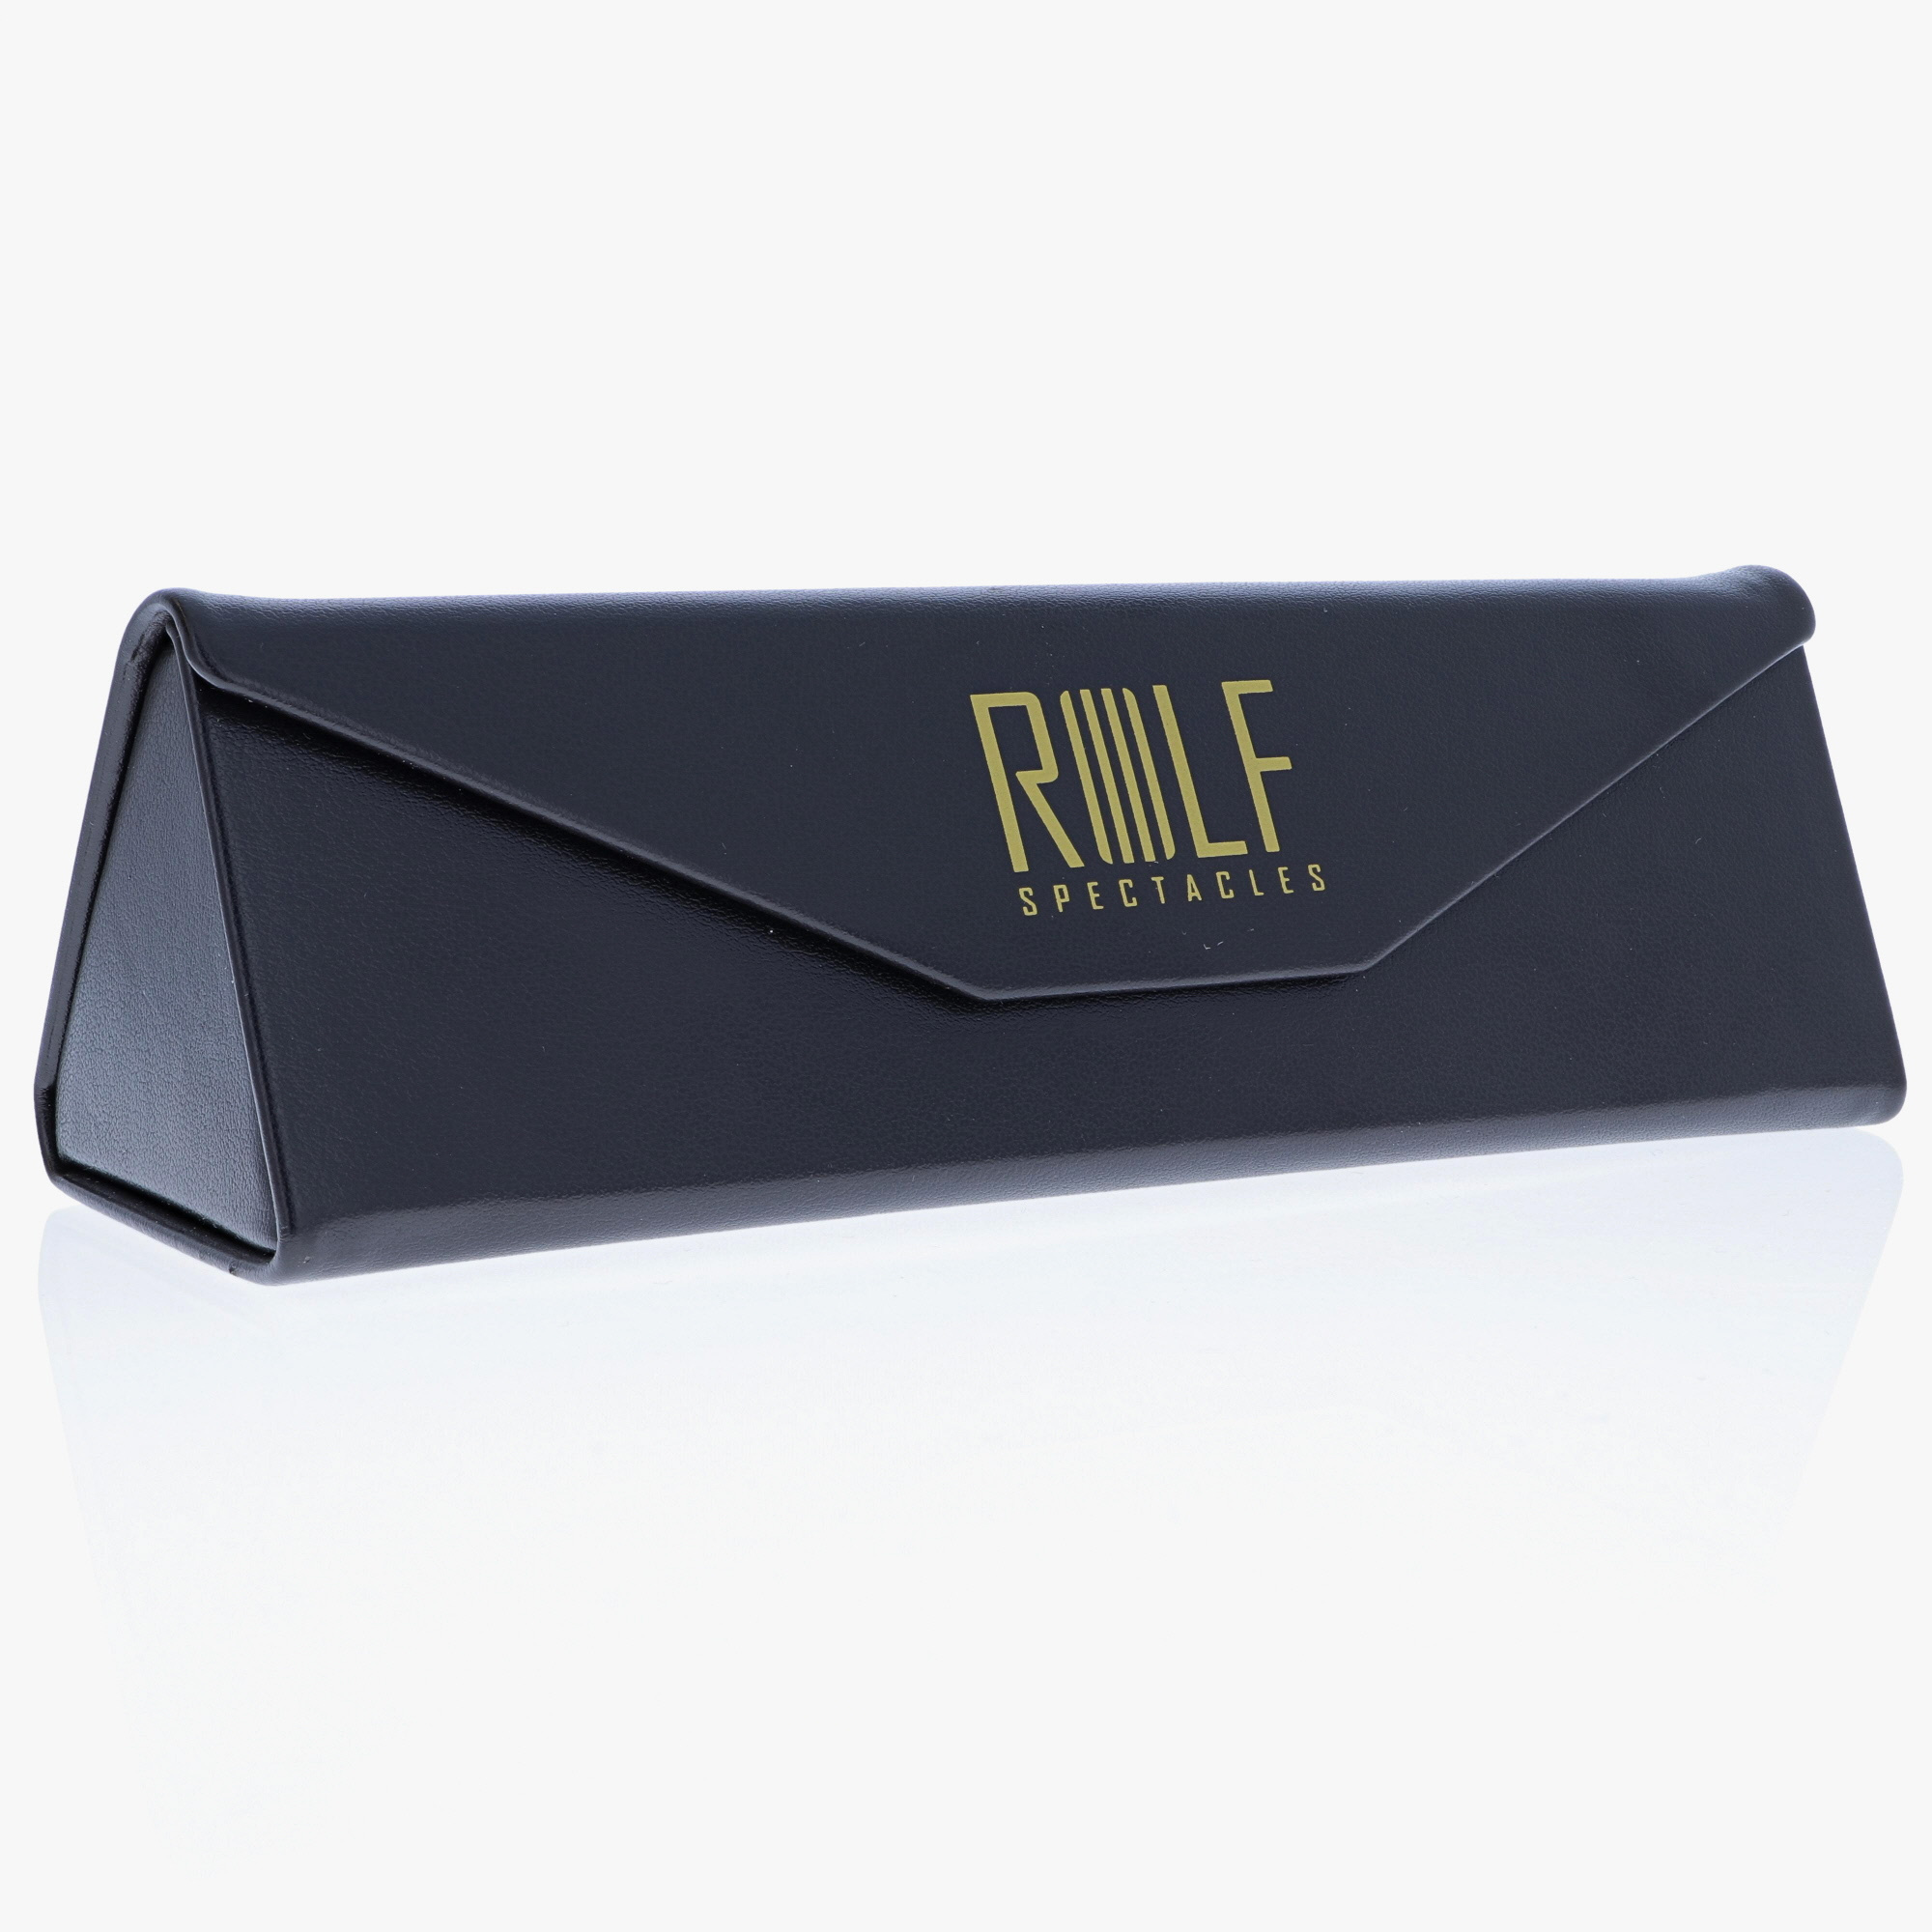 ROLF SUBSTANCE / RUHR / GENTLE GREYBLUE